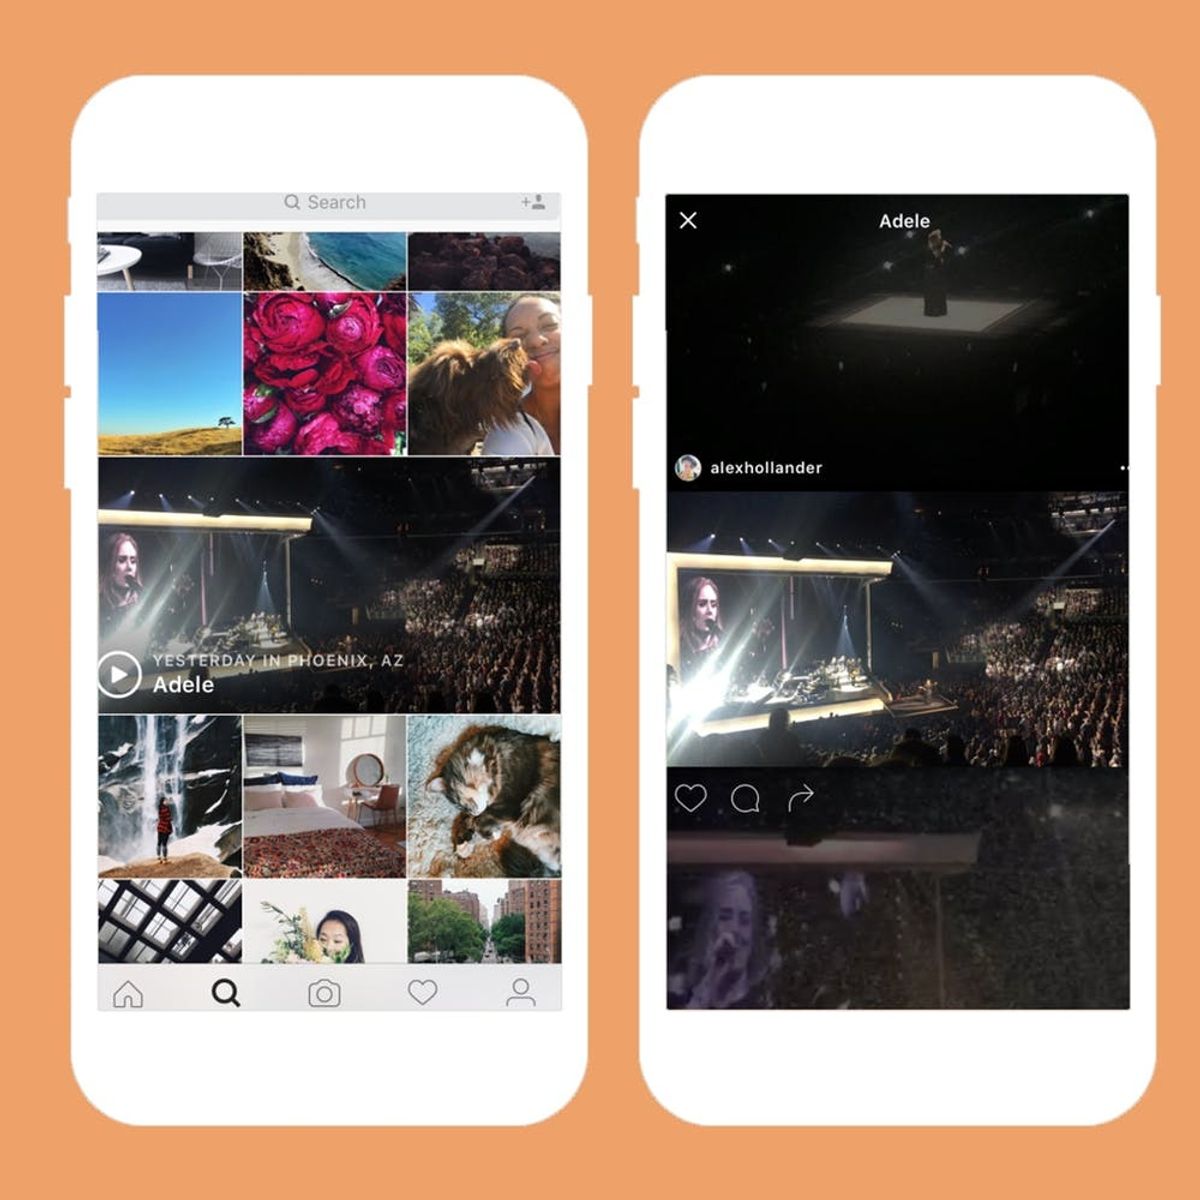 Instagram Will Keep You Up-to-Date on Live Events